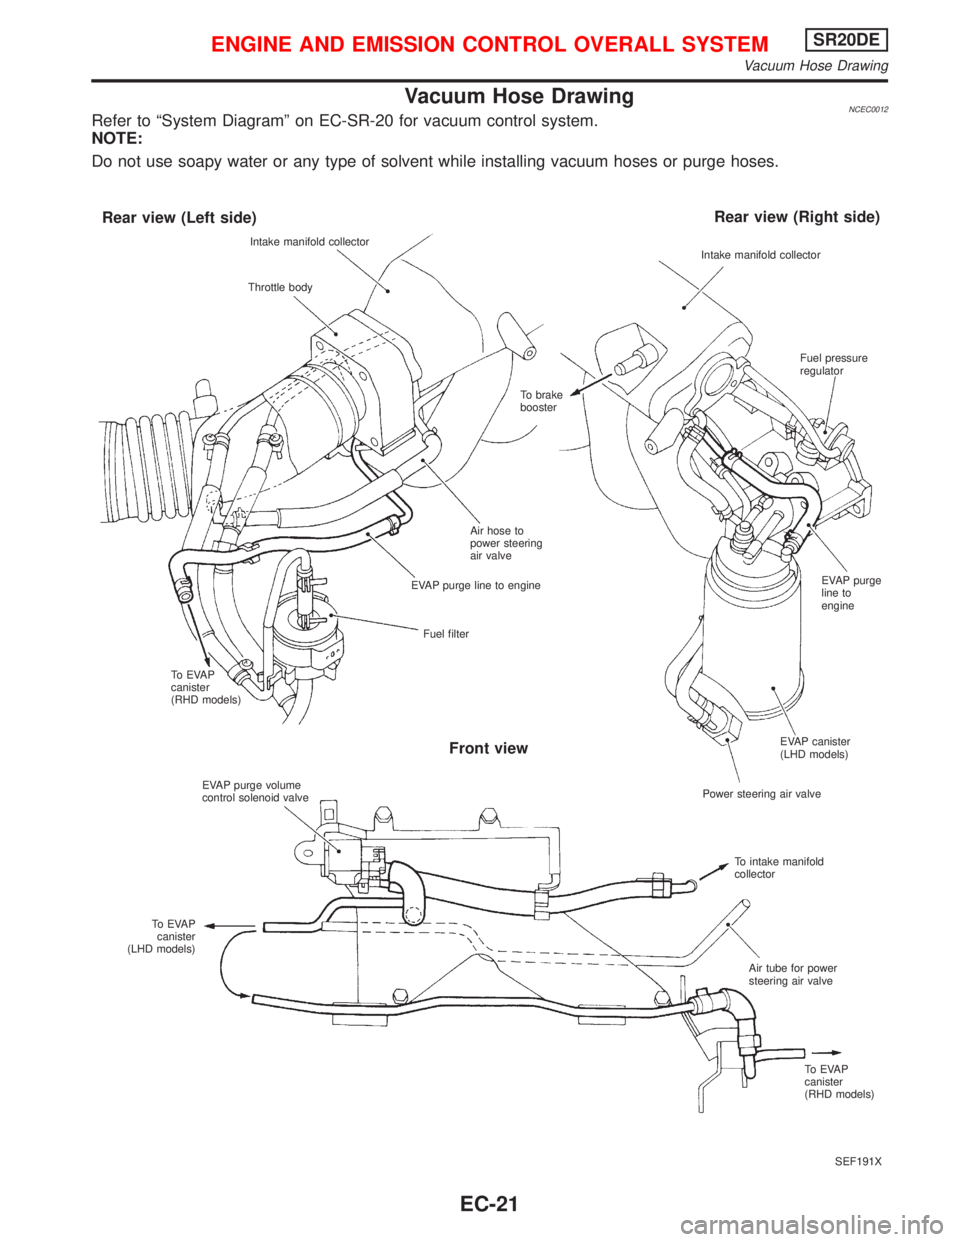 NISSAN PRIMERA 1999  Electronic Repair Manual Vacuum Hose DrawingNCEC0012Refer to ªSystem Diagramº on EC-SR-20 for vacuum control system.
NOTE:
Do not use soapy water or any type of solvent while installing vacuum hoses or purge hoses.
SEF191X 